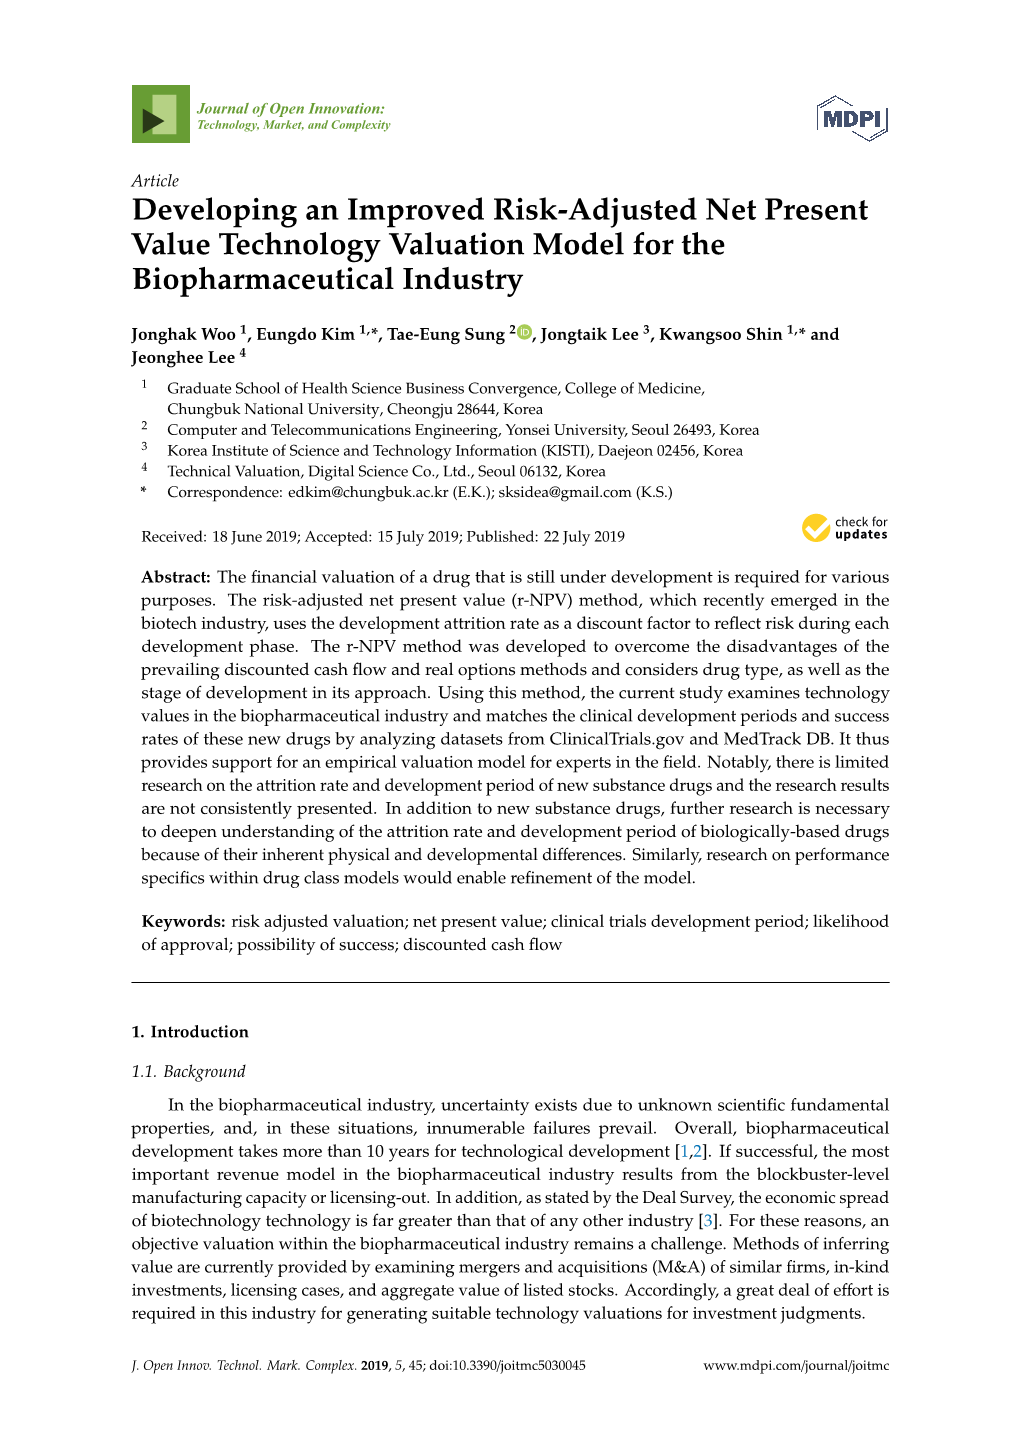 Developing an Improved Risk-Adjusted Net Present Value Technology Valuation Model for the Biopharmaceutical Industry